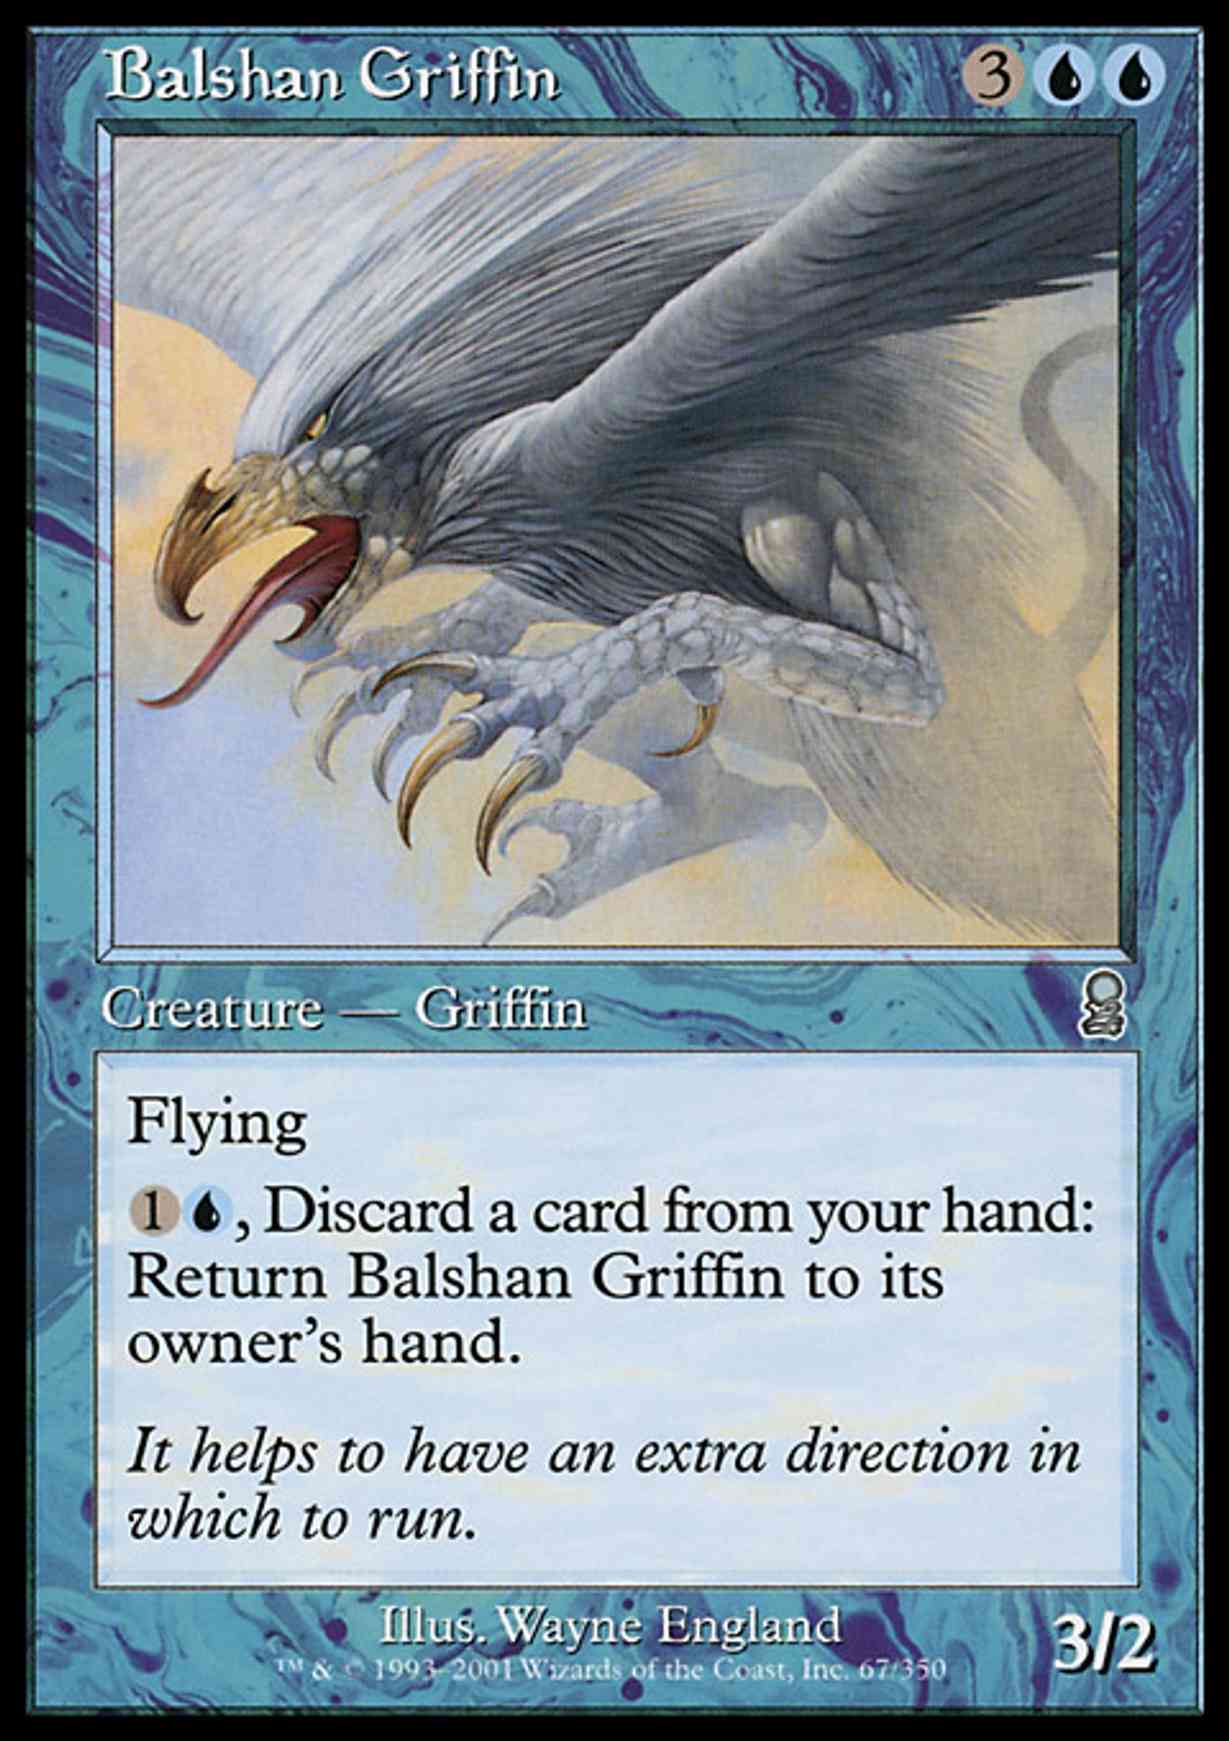 Balshan Griffin magic card front